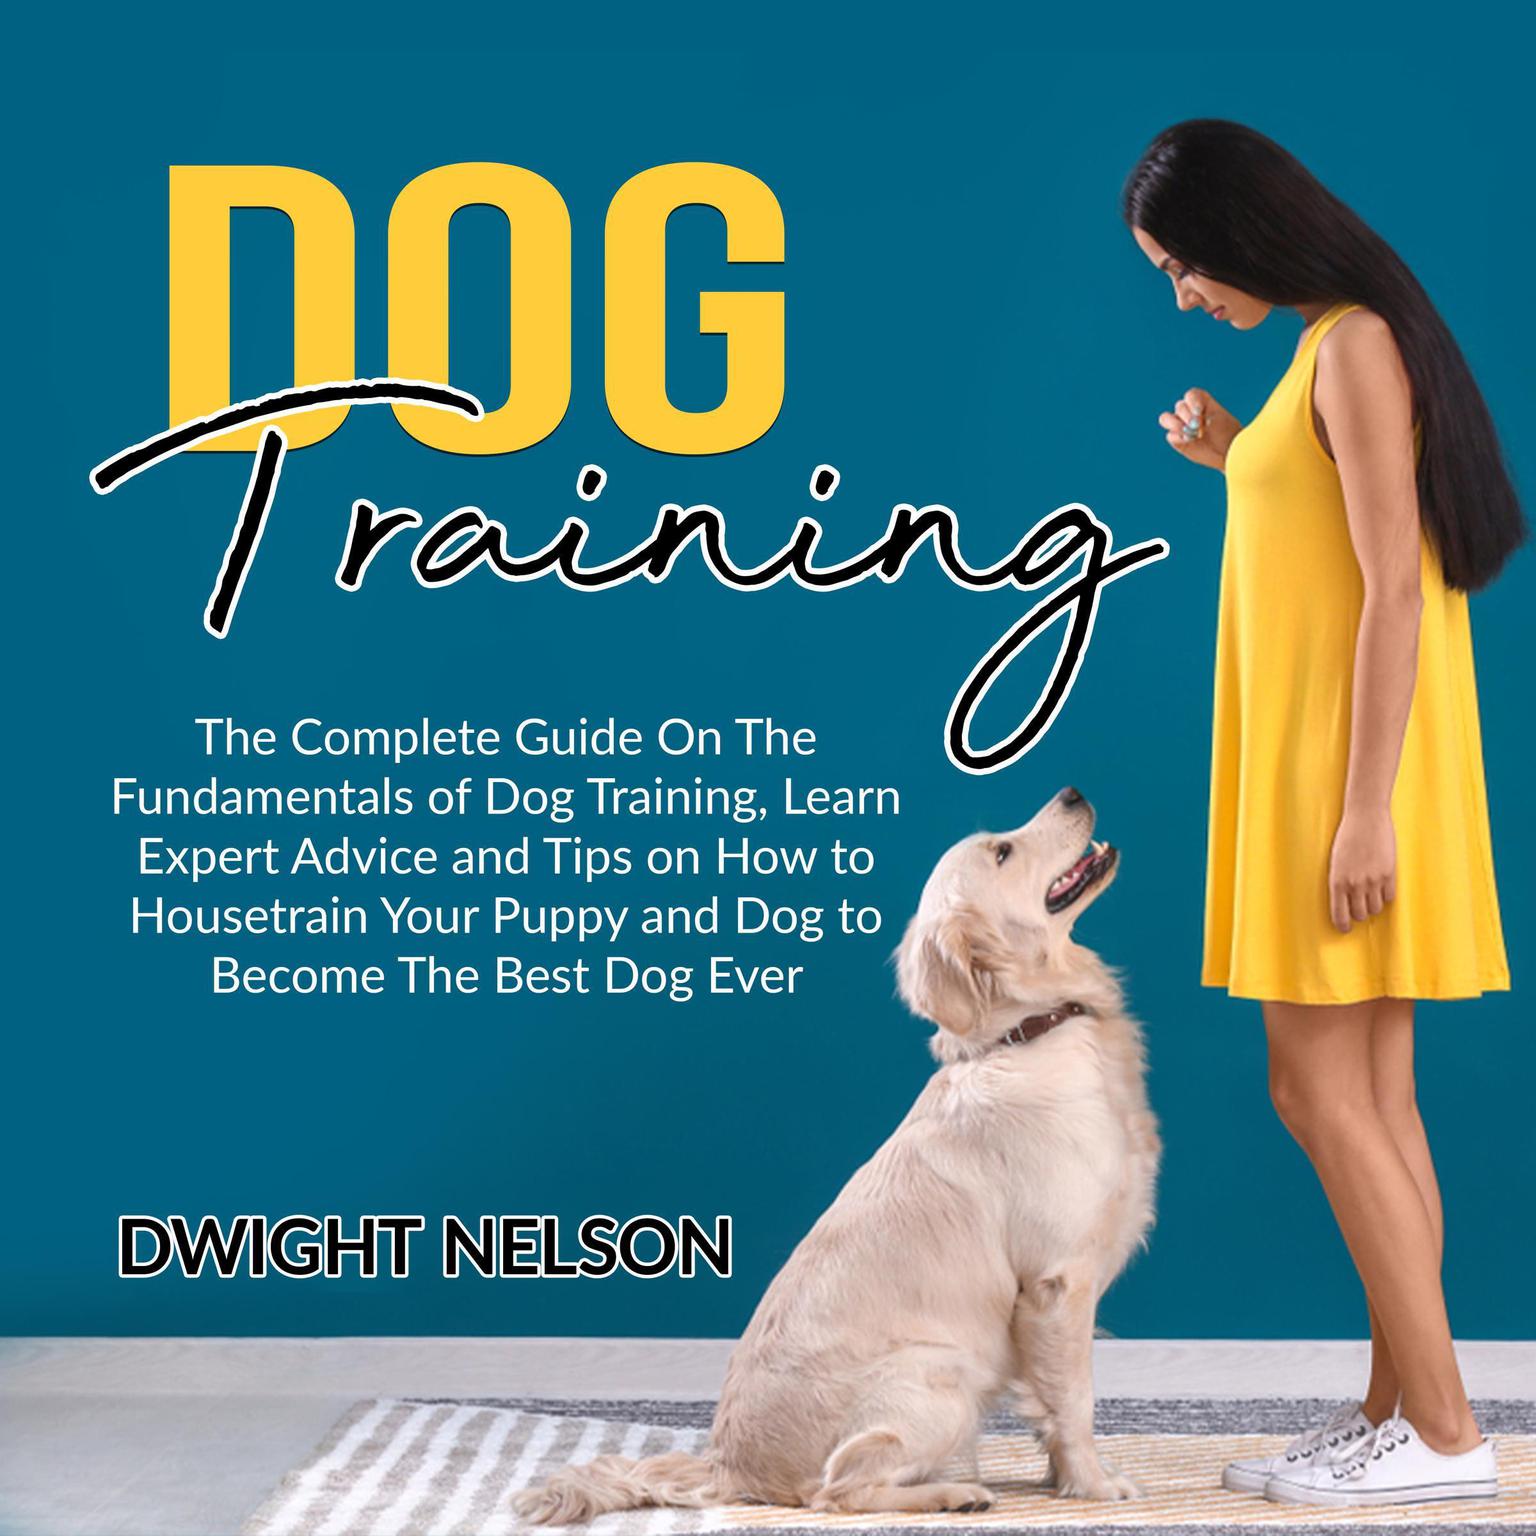 Dog Training: The Complete Guide On The Fundamentals of Dog Training, Learn Expert Advice and Tips on How to Housetrain Your Puppy and Dog to Become The Best Dog Ever Audiobook, by Dwight Nelson